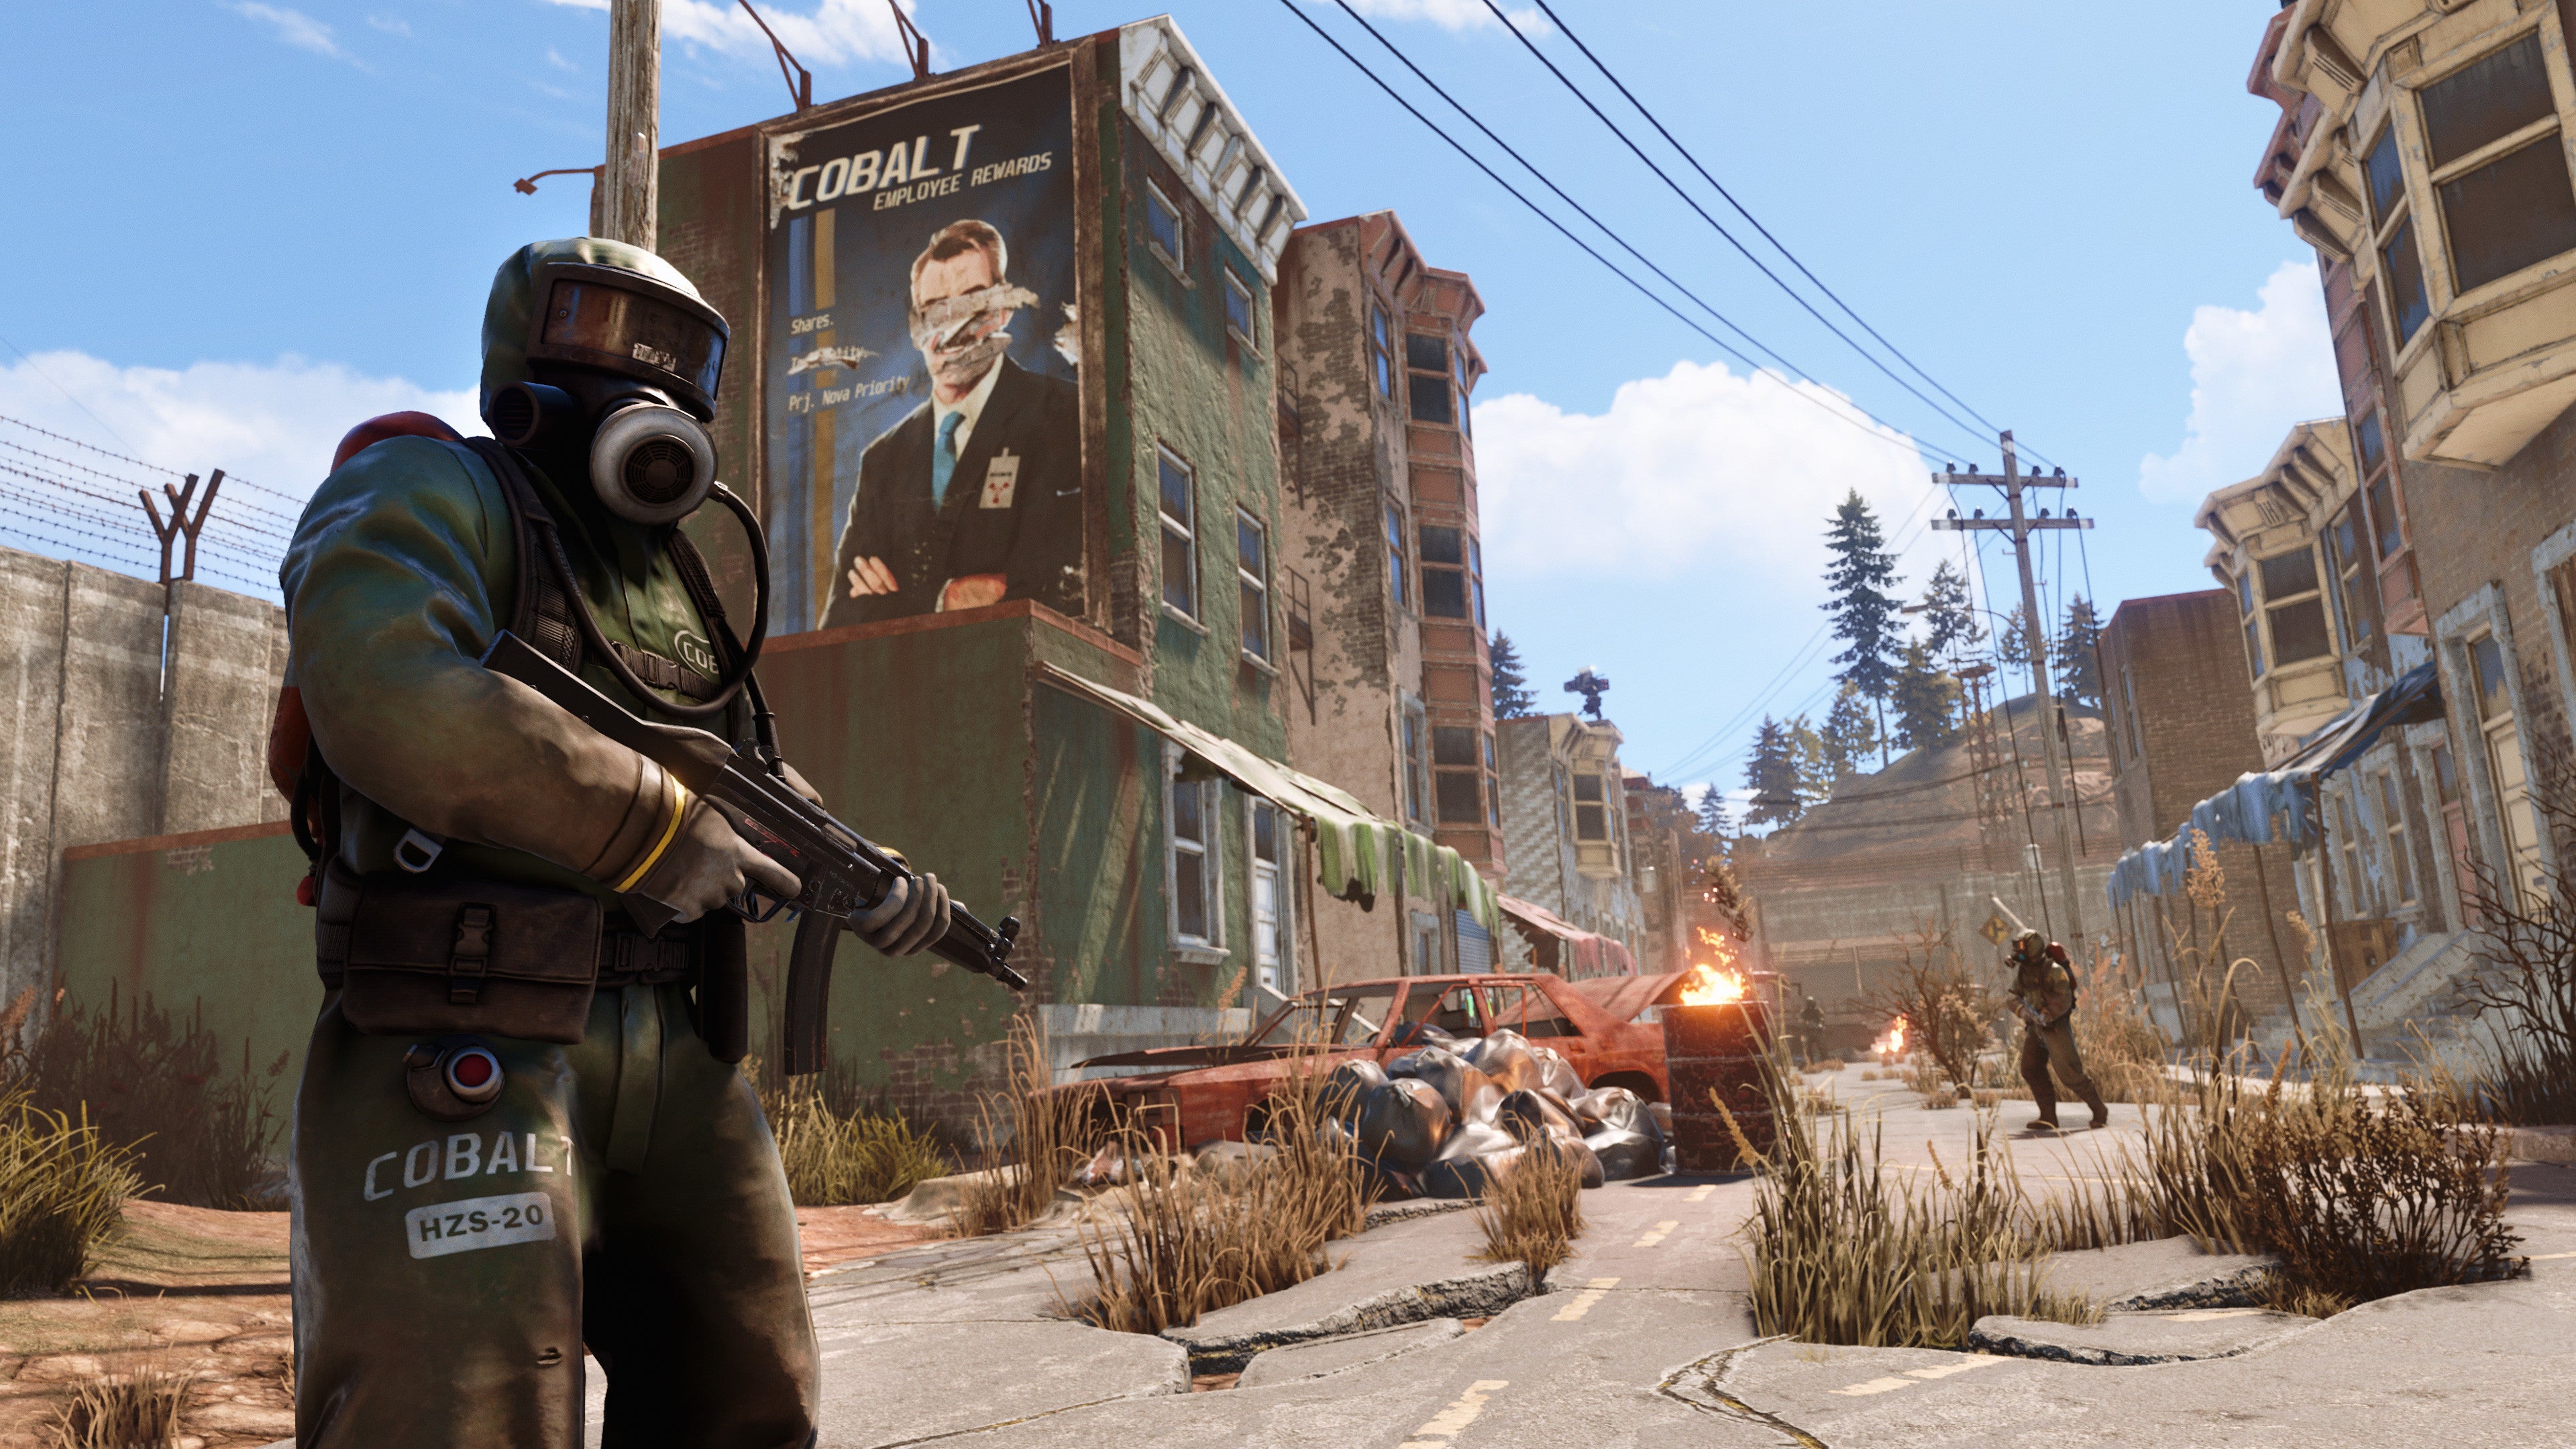 Armed people in hazmat suits stand in a ruined street in a Rust screenshot.